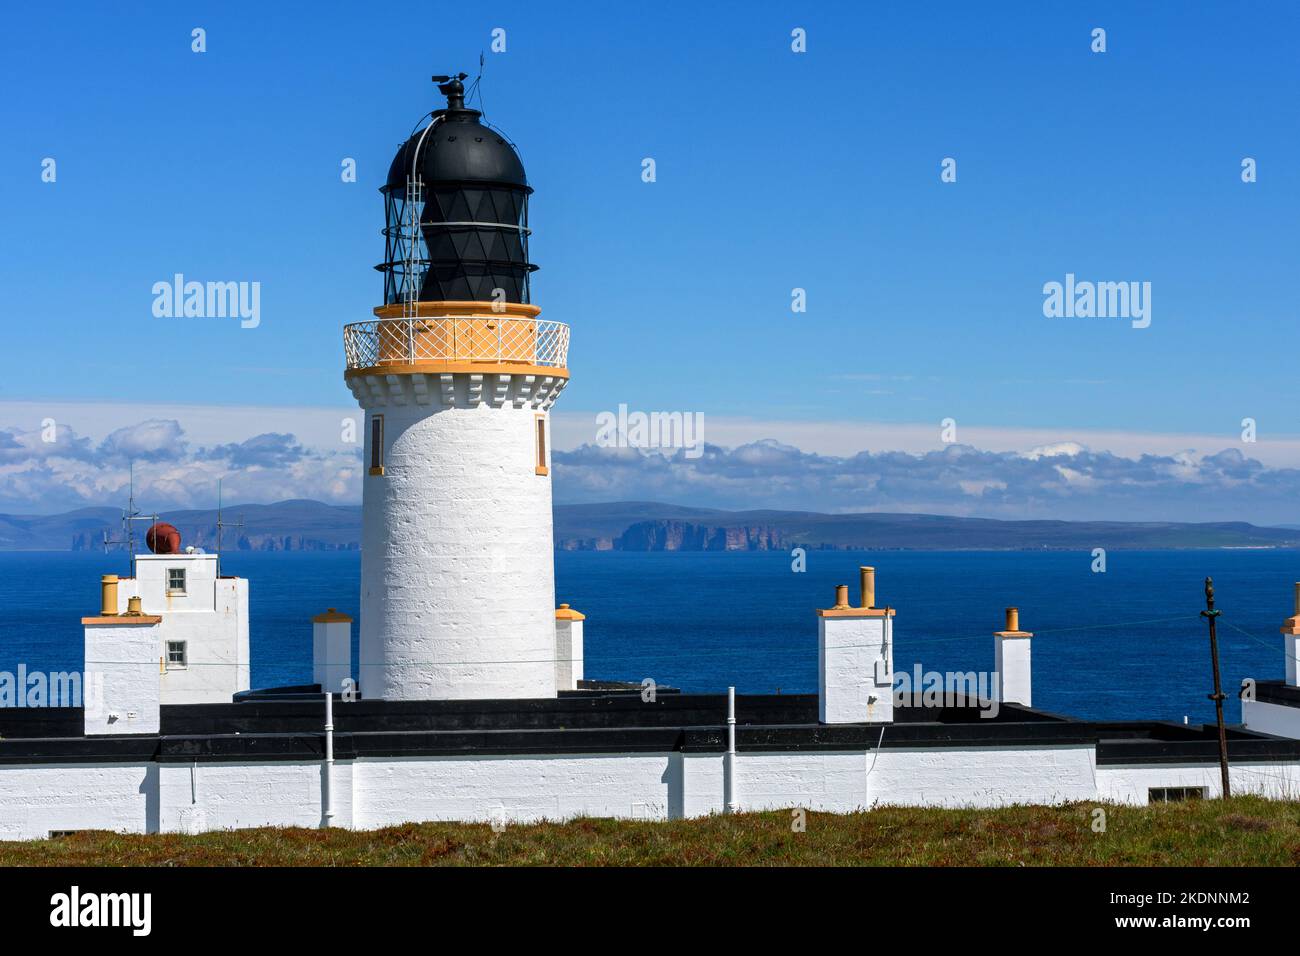 The lighthouse near the summit of Dunnet Head, Caithness, Scotland, UK.  In the distance are the hills of Hoy, Orkney, over the Pentland Firth. Stock Photo